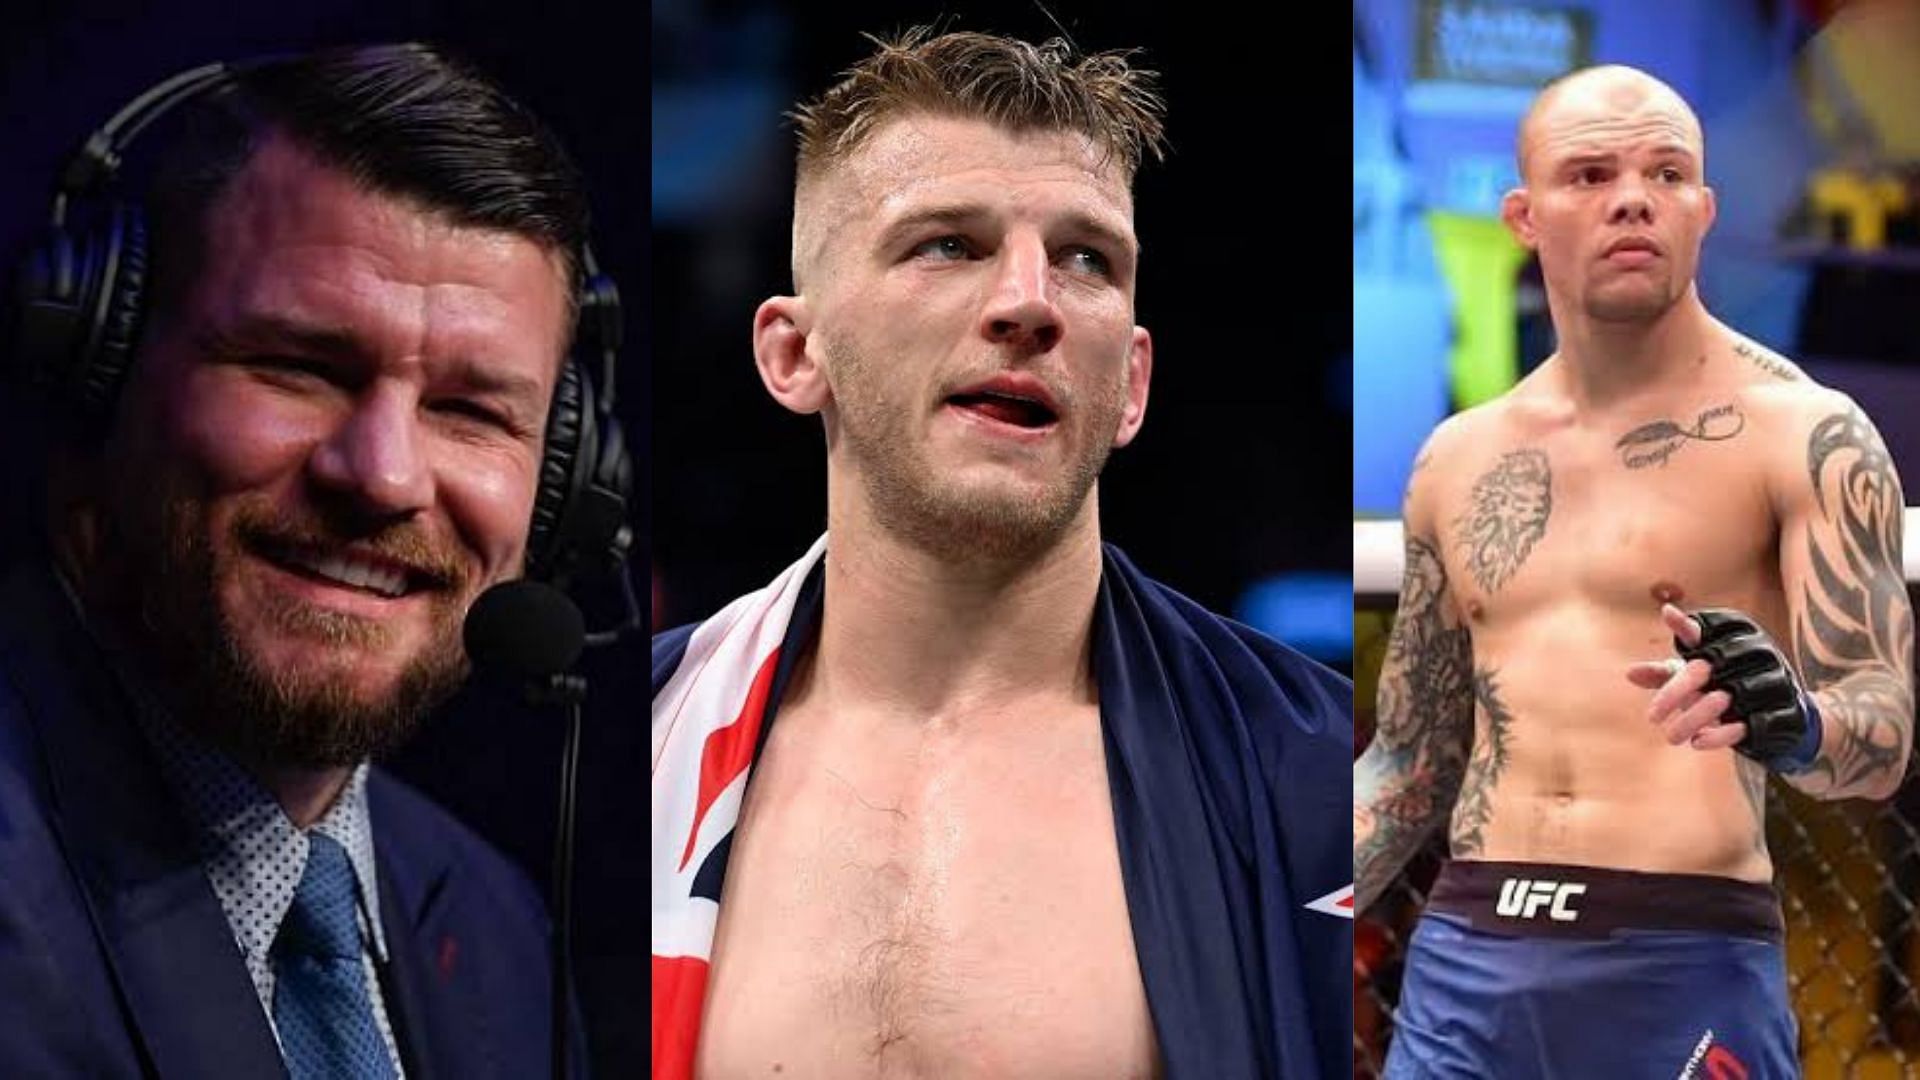 Michael Bisping (L) and Anthony Smith (R) have given their take on Dan Hooker (M) after his latest loss